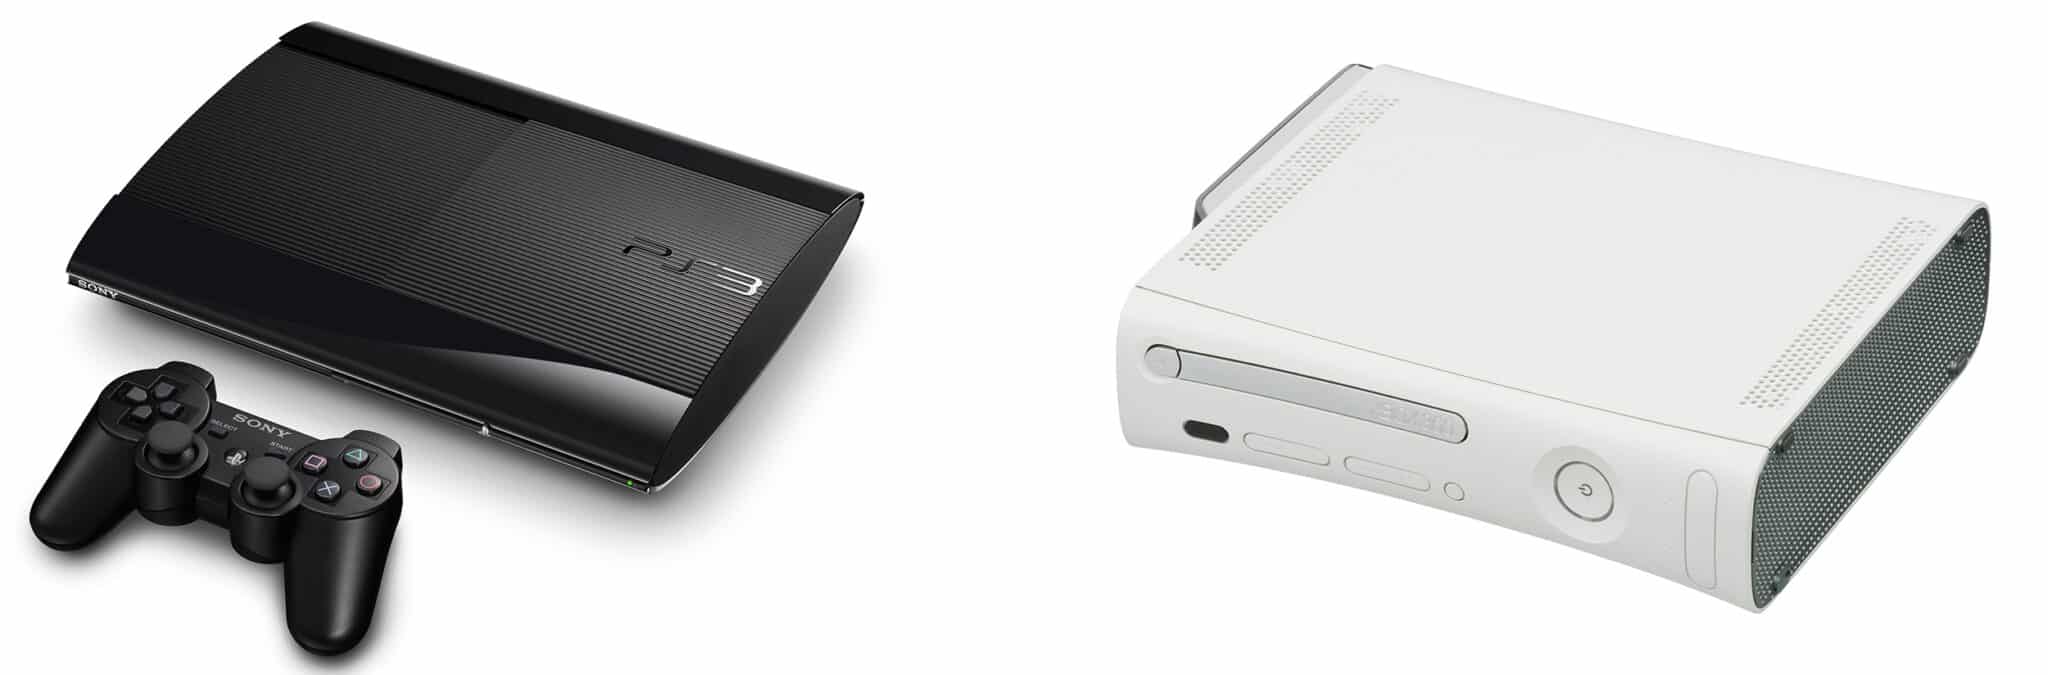 Why the PS3, Xbox 360 is still worth buying now